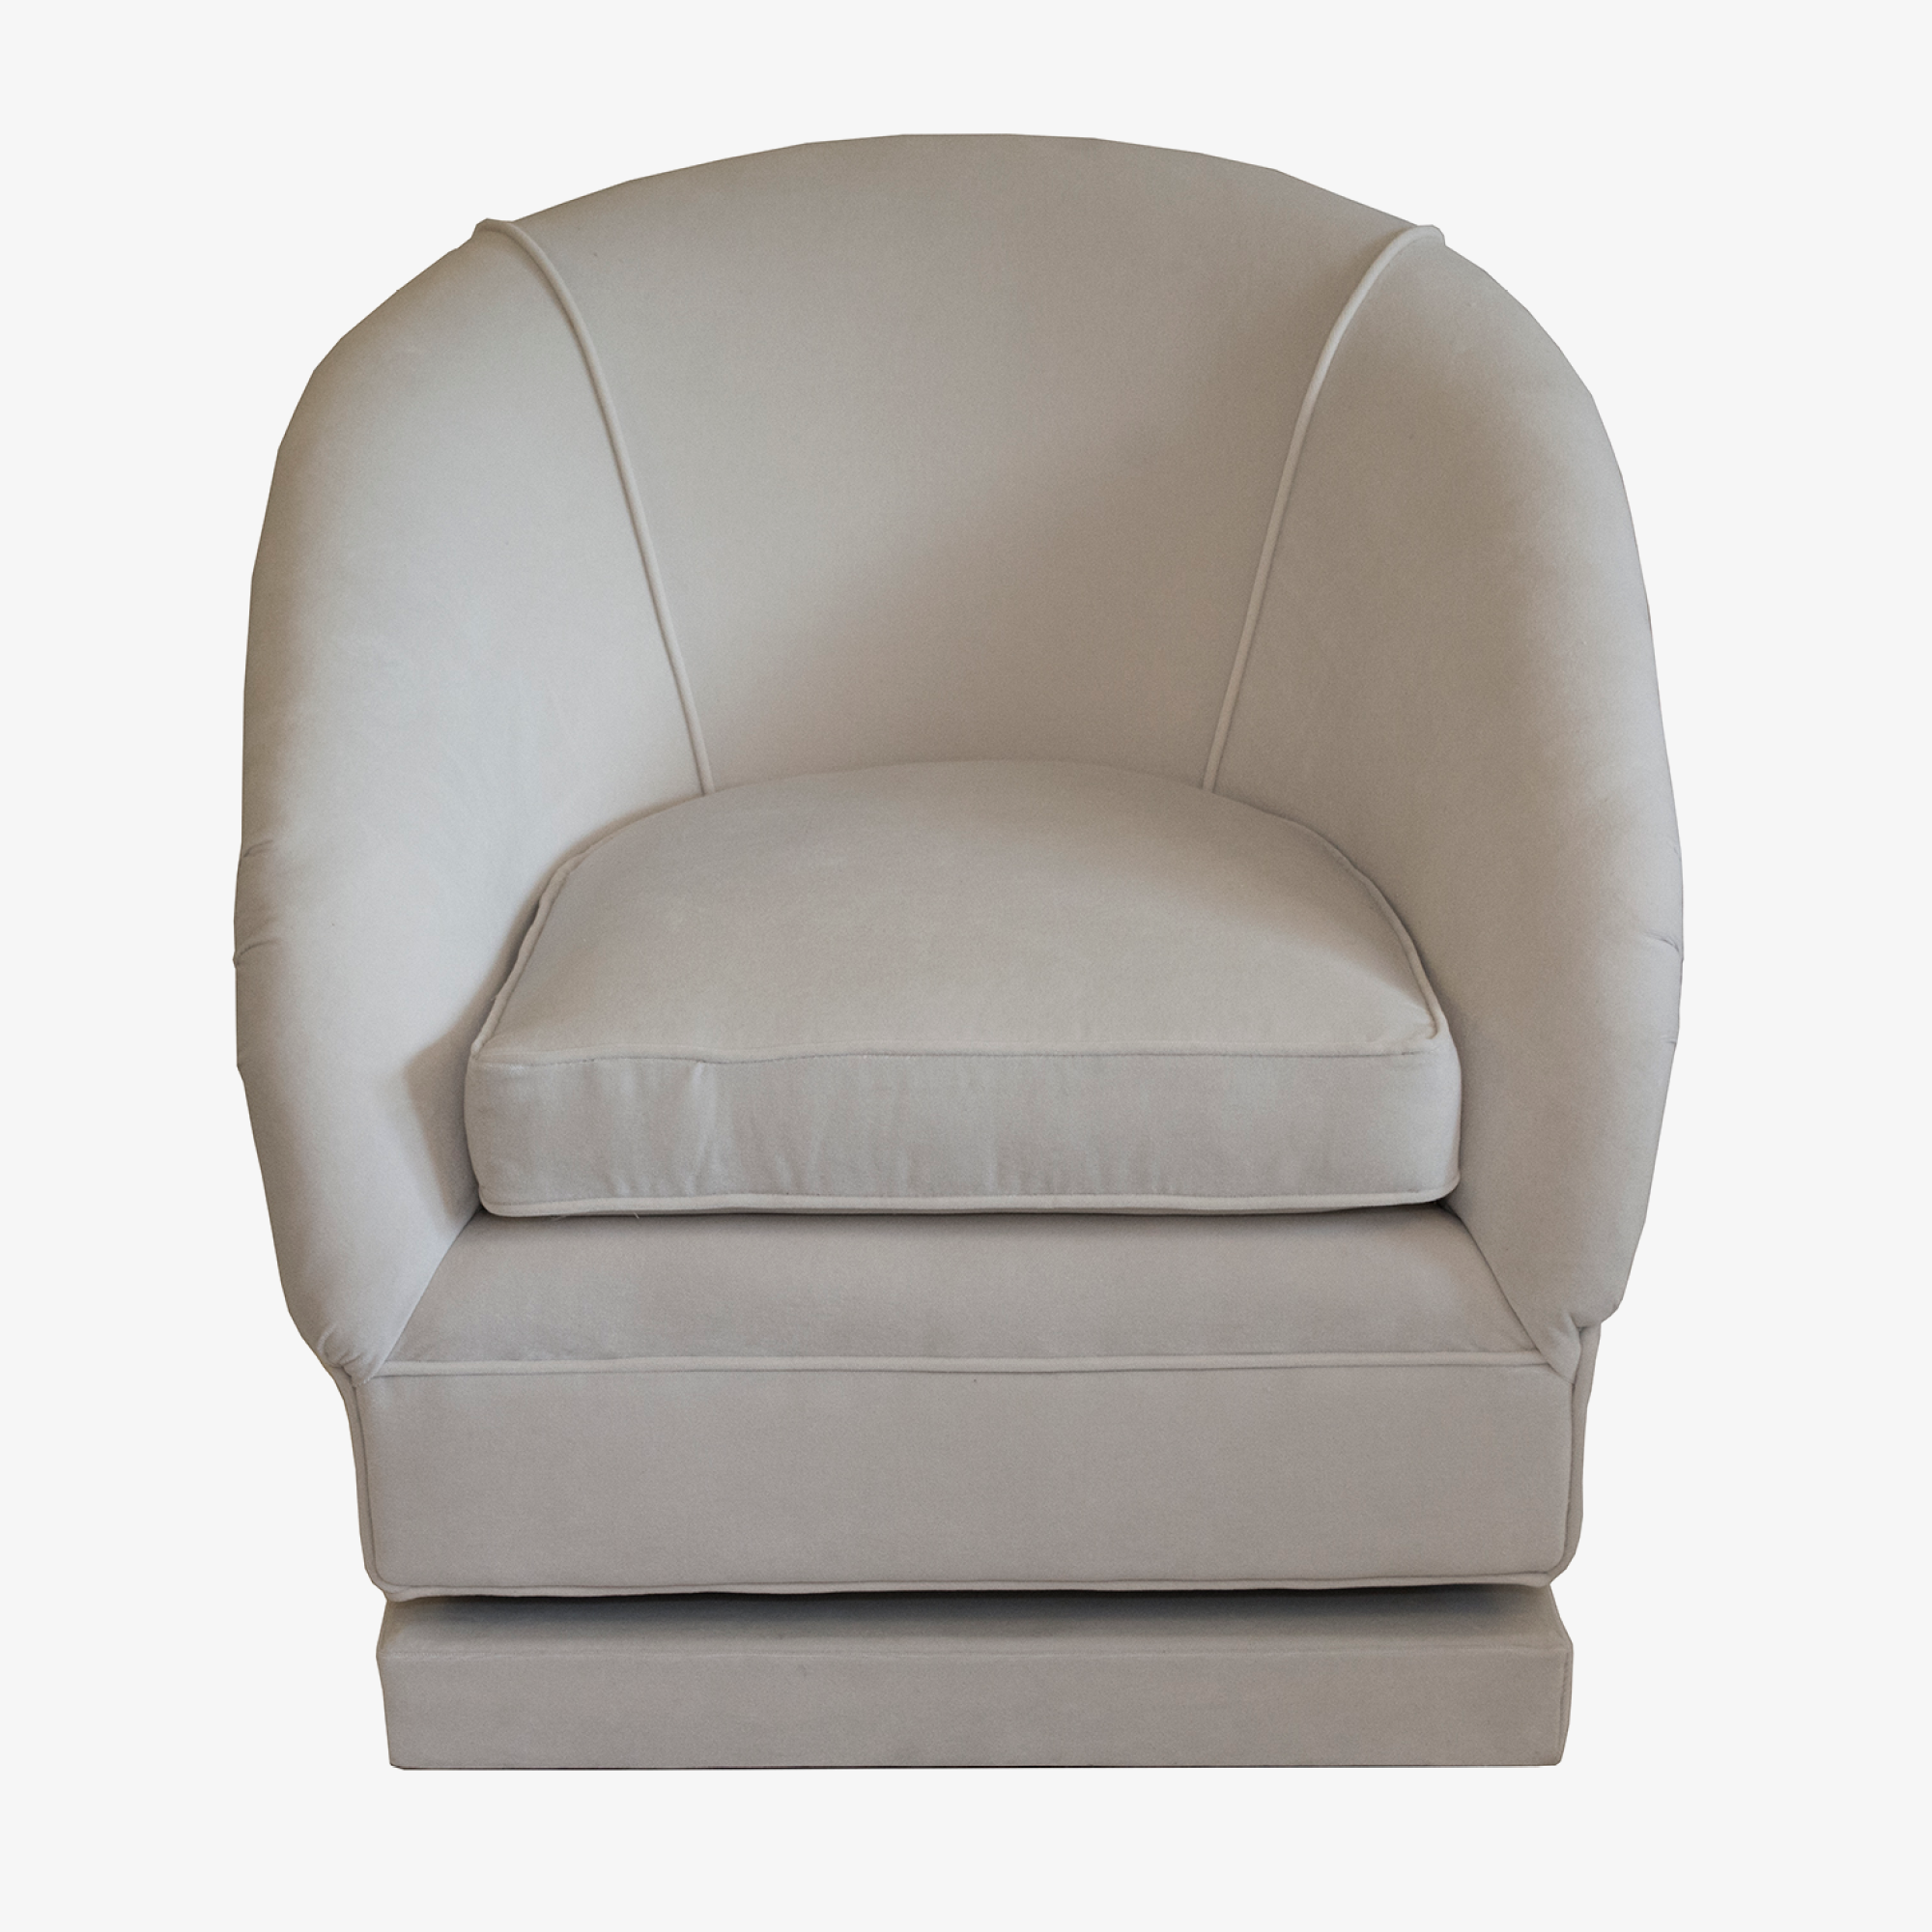 Bespoke Set of Swivel Chairs with Custom Ottoman 4.png